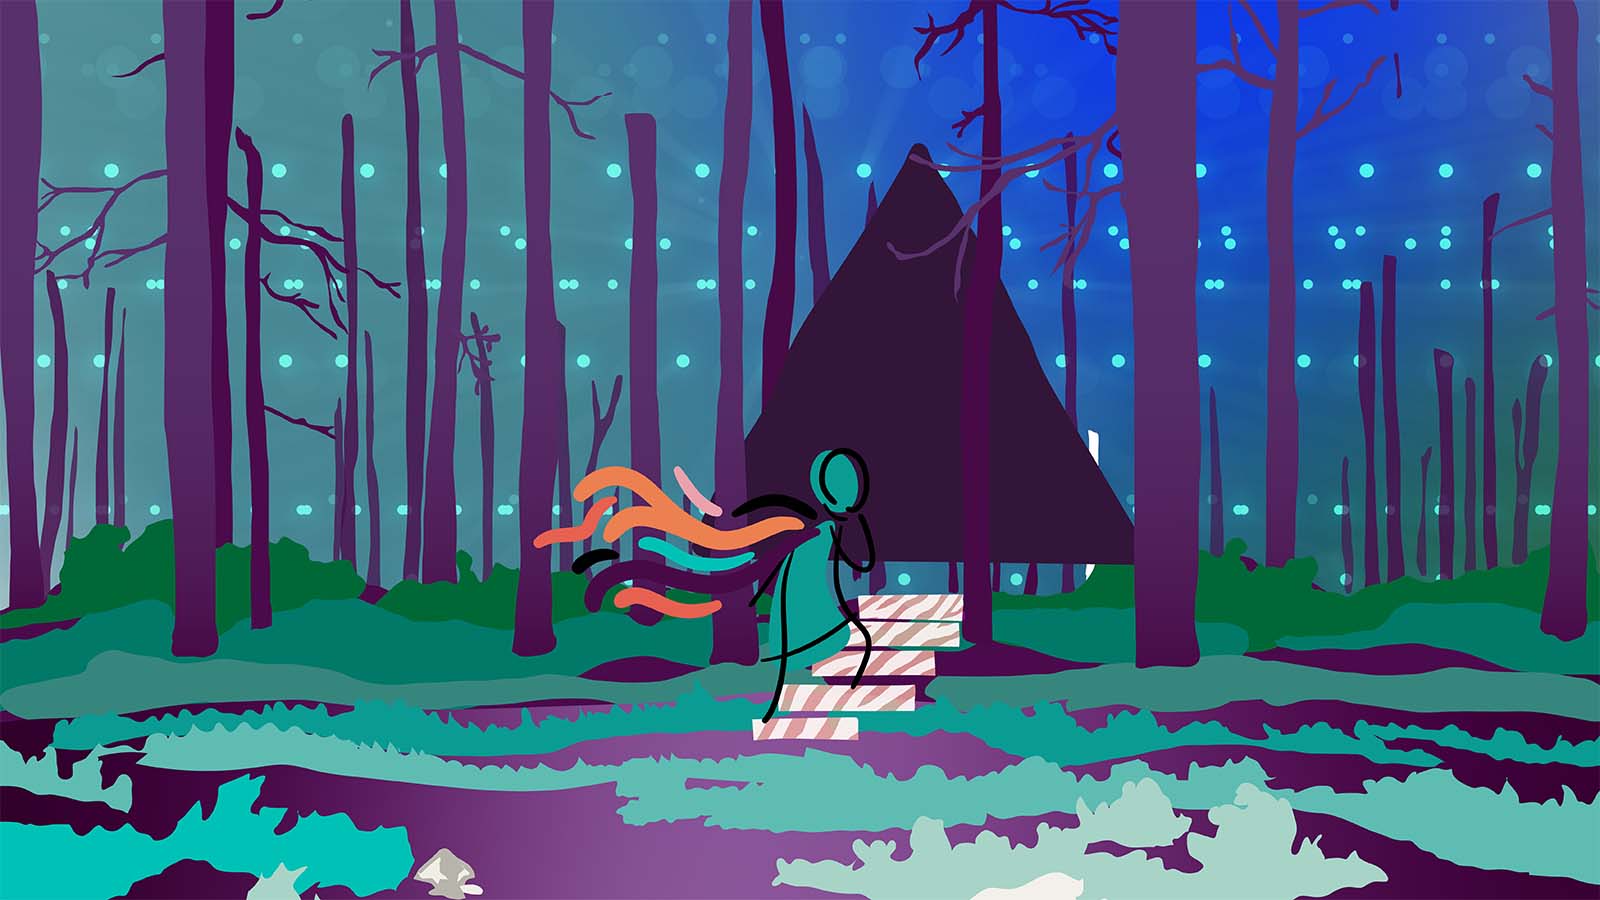 A figure entering a wooded cabin, symbolizing the rare disease odyssey.